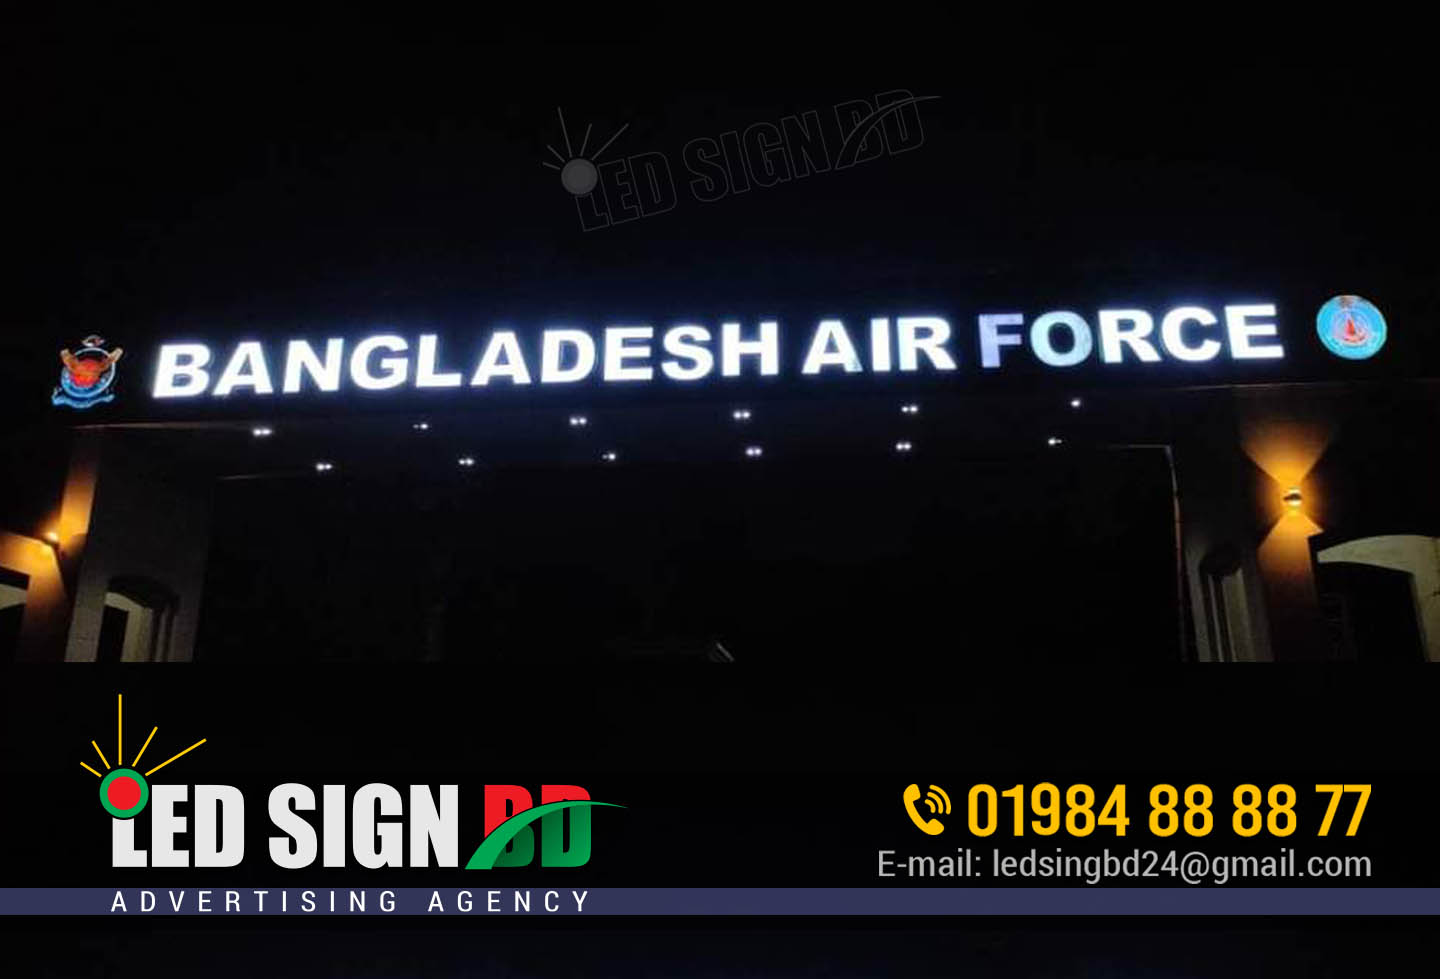 Acrylic 3D Letter Signs Making in Bangladesh 3D Letter Signboard Making Company If you need a sign for your business, look no further than 3D Letter Signboard Making Company. We have been in the business of making high-quality signs for over 20 years. We use the latest technology to create signs that are not only eye-catching but also durable. We have a wide range of materials to choose from, so you can be sure to find a sign that fits your needs. We also offer a variety of finishes, so you can get the exact look you want for your business. 1. Company name and tagline 2. Company history 3. What we do 4. Our team 5. Our clients 1. Company name and tagline 3D Letter Signboard Making Company is a leading provider of high-quality 3D letter signboards. We have been in business for over 10 years and have an excellent reputation for providing quality products and services. Our company name and tagline say it all: we are the best at what we do. We take pride in our work and guarantee that our products will meet or exceed your expectations. So if you're looking for a company that can provide you with the best 3D letter signboards, look no further than 3D Letter Signboard Making Company! 2. Company history Founded in 2006, 3D Letter Signboard Making Company is a leading manufacturer of 3D letter signboards. The company was started by two friends, John and James, who had a passion for 3D letter signboards. They started the company with a small loan from their parents and have since grown the company into a successful business. The company has come a long way since its humble beginnings. John and James have always been committed to providing the highest quality products and customer service. They have continued to invest in the latest technology and equipment to ensure that their products are of the highest quality. They have also expanded their product range to include a wide variety of 3D letter signboards. 3D Letter Signboard Making Company is now a well-established business with a strong reputation for quality and service. The company’s products are sold all over the world and they have a team of skilled and experienced employees. John and James are proud of what they have achieved and are passionate about continuing to grow the company. 3. What we do 3D Letter Signboard Making Company provides three-dimensional lettering solutions to business owners and organizations. We work with a wide range of materials, including metals, plastics, and wood, to create signs that are both functional and attractive. We also offer a variety of finishing options, such as painting, powder coating, and Polished Stainless Steel (PSS), to ensure that your sign will look its best. 3D Letter Signboard Making Company has over 25 years of experience in the sign industry. We are a family-owned and operated business, and we take pride in our work. We are committed to providing our customers with the highest quality signs at the most competitive prices. If you are looking for a sign company that can provide you with a unique and eye-catching sign, look no further than 3D Letter Signboard Making Company. We will work with you to create a sign that meets your needs and exceeds your expectations. 4. Our team At 3D Letter Signboard Making Company, we have a team of experienced professionals who are dedicated to providing the best possible service to our clients. We have a wide range of skills and expertise, and we are always willing to go the extra mile to make sure that our clients are satisfied. We are a family-owned business, and we take pride in our work. We have been in business for over 20 years, and we have a reputation for being the best in the business. We are always looking for new ways to improve our services, and we are always willing to listen to our clients’ needs. We are committed to providing the highest quality products and services to our clients, and we will continue to work hard to meet and exceed their expectations. 5. Our clients We've had the privilege of working with some amazing clients over the years, and we're grateful for each and every one of them. Here are just a few of the clients we've had the pleasure of working with: Client 1: A national retail chain that was looking for a way to stand out from the competition and get noticed by potential customers. We created a 3D letter signboard for them that was installed at their flagship store. The sign was so successful that they ended up ordering more for additional stores. Client 2: A local business that was in need of a new sign for their storefront. We worked with them to create a custom 3D letter sign that fit their budget and their branding. They were so happy with the result that they've since ordered additional signs from us for their other locations. Client 3: A school that was looking for a way to show their school spirit. We designed and installed a 3D letter signboard for them that featured their school colors and mascot. The sign has been a hit with students, staff, and parents alike. Client 4: A church that was looking for a way to beautify their entrance. We created a 3D letter signboard for them that featured their church name and logo. They were so pleased with the result that they've since ordered additional signs from us for their other properties. Client 5: A large corporation that was looking for a way to promote their brand. We designed and installed a 3D letter signboard for them that was placed in their lobby. The sign was so successful that they've since ordered more for their other offices. 3D Letter Signboard Making Company is a great company that produces high quality signs for businesses. They have a wide range of products to choose from and their prices are very reasonable. I would highly recommend this company to anyone in need of a sign for their business. 3d acrylic letters. 3d acrylic letters for wall. 3d acrylic letter sign board price. How to make 3d acrylic letters. Acrylic letters signage. 3d acrylic letter signs. How to make 3d acrylic signs. How to make 3d acrylic letter. Hcrylic 3d letters price. How do you make acrylic signs. How to make a backlit acrylic sign. Acrylic sign board price in bangladesh. Acrylic backlit sign board. Acrylic backlit letter. Acrylic backlit board. Acrylic backlit signage detail. Sign board making online. How to make sign board design. 3d acrylic letter sign board price. 3d sign board making. Sign board making near me. Sow to make led sign board circuit. How to make sign board in minecraft. 3d sign board maker near me. Ishatech advertising ltd. Sign board advertising. Advertising sign board design. Billboard advertising cost in bangladesh. Billboard advertising bd. Sign board price in bangladesh. Sign board design in bangladesh. Digital billboard price in bangladesh. Signboard bd. Sign board advertising company. Advertising signboards. Signboard marketing. Signboard advertising company. Name plate design online free. Name plate designs for main gate. Name plate designs images. Name plate design for home. How to make name plate at home. Name plate design ideas. Advertising agency in dhaka. Billboard advertising bd. List of advertising agency in bangladesh. Top advertising company in bangladesh. Top 10 advertising agency in bangladesh. Billboard advertising cost in bangladesh. Newspaper advertising agency in dhaka bangladesh. Specialized advertising agency in bangladesh.